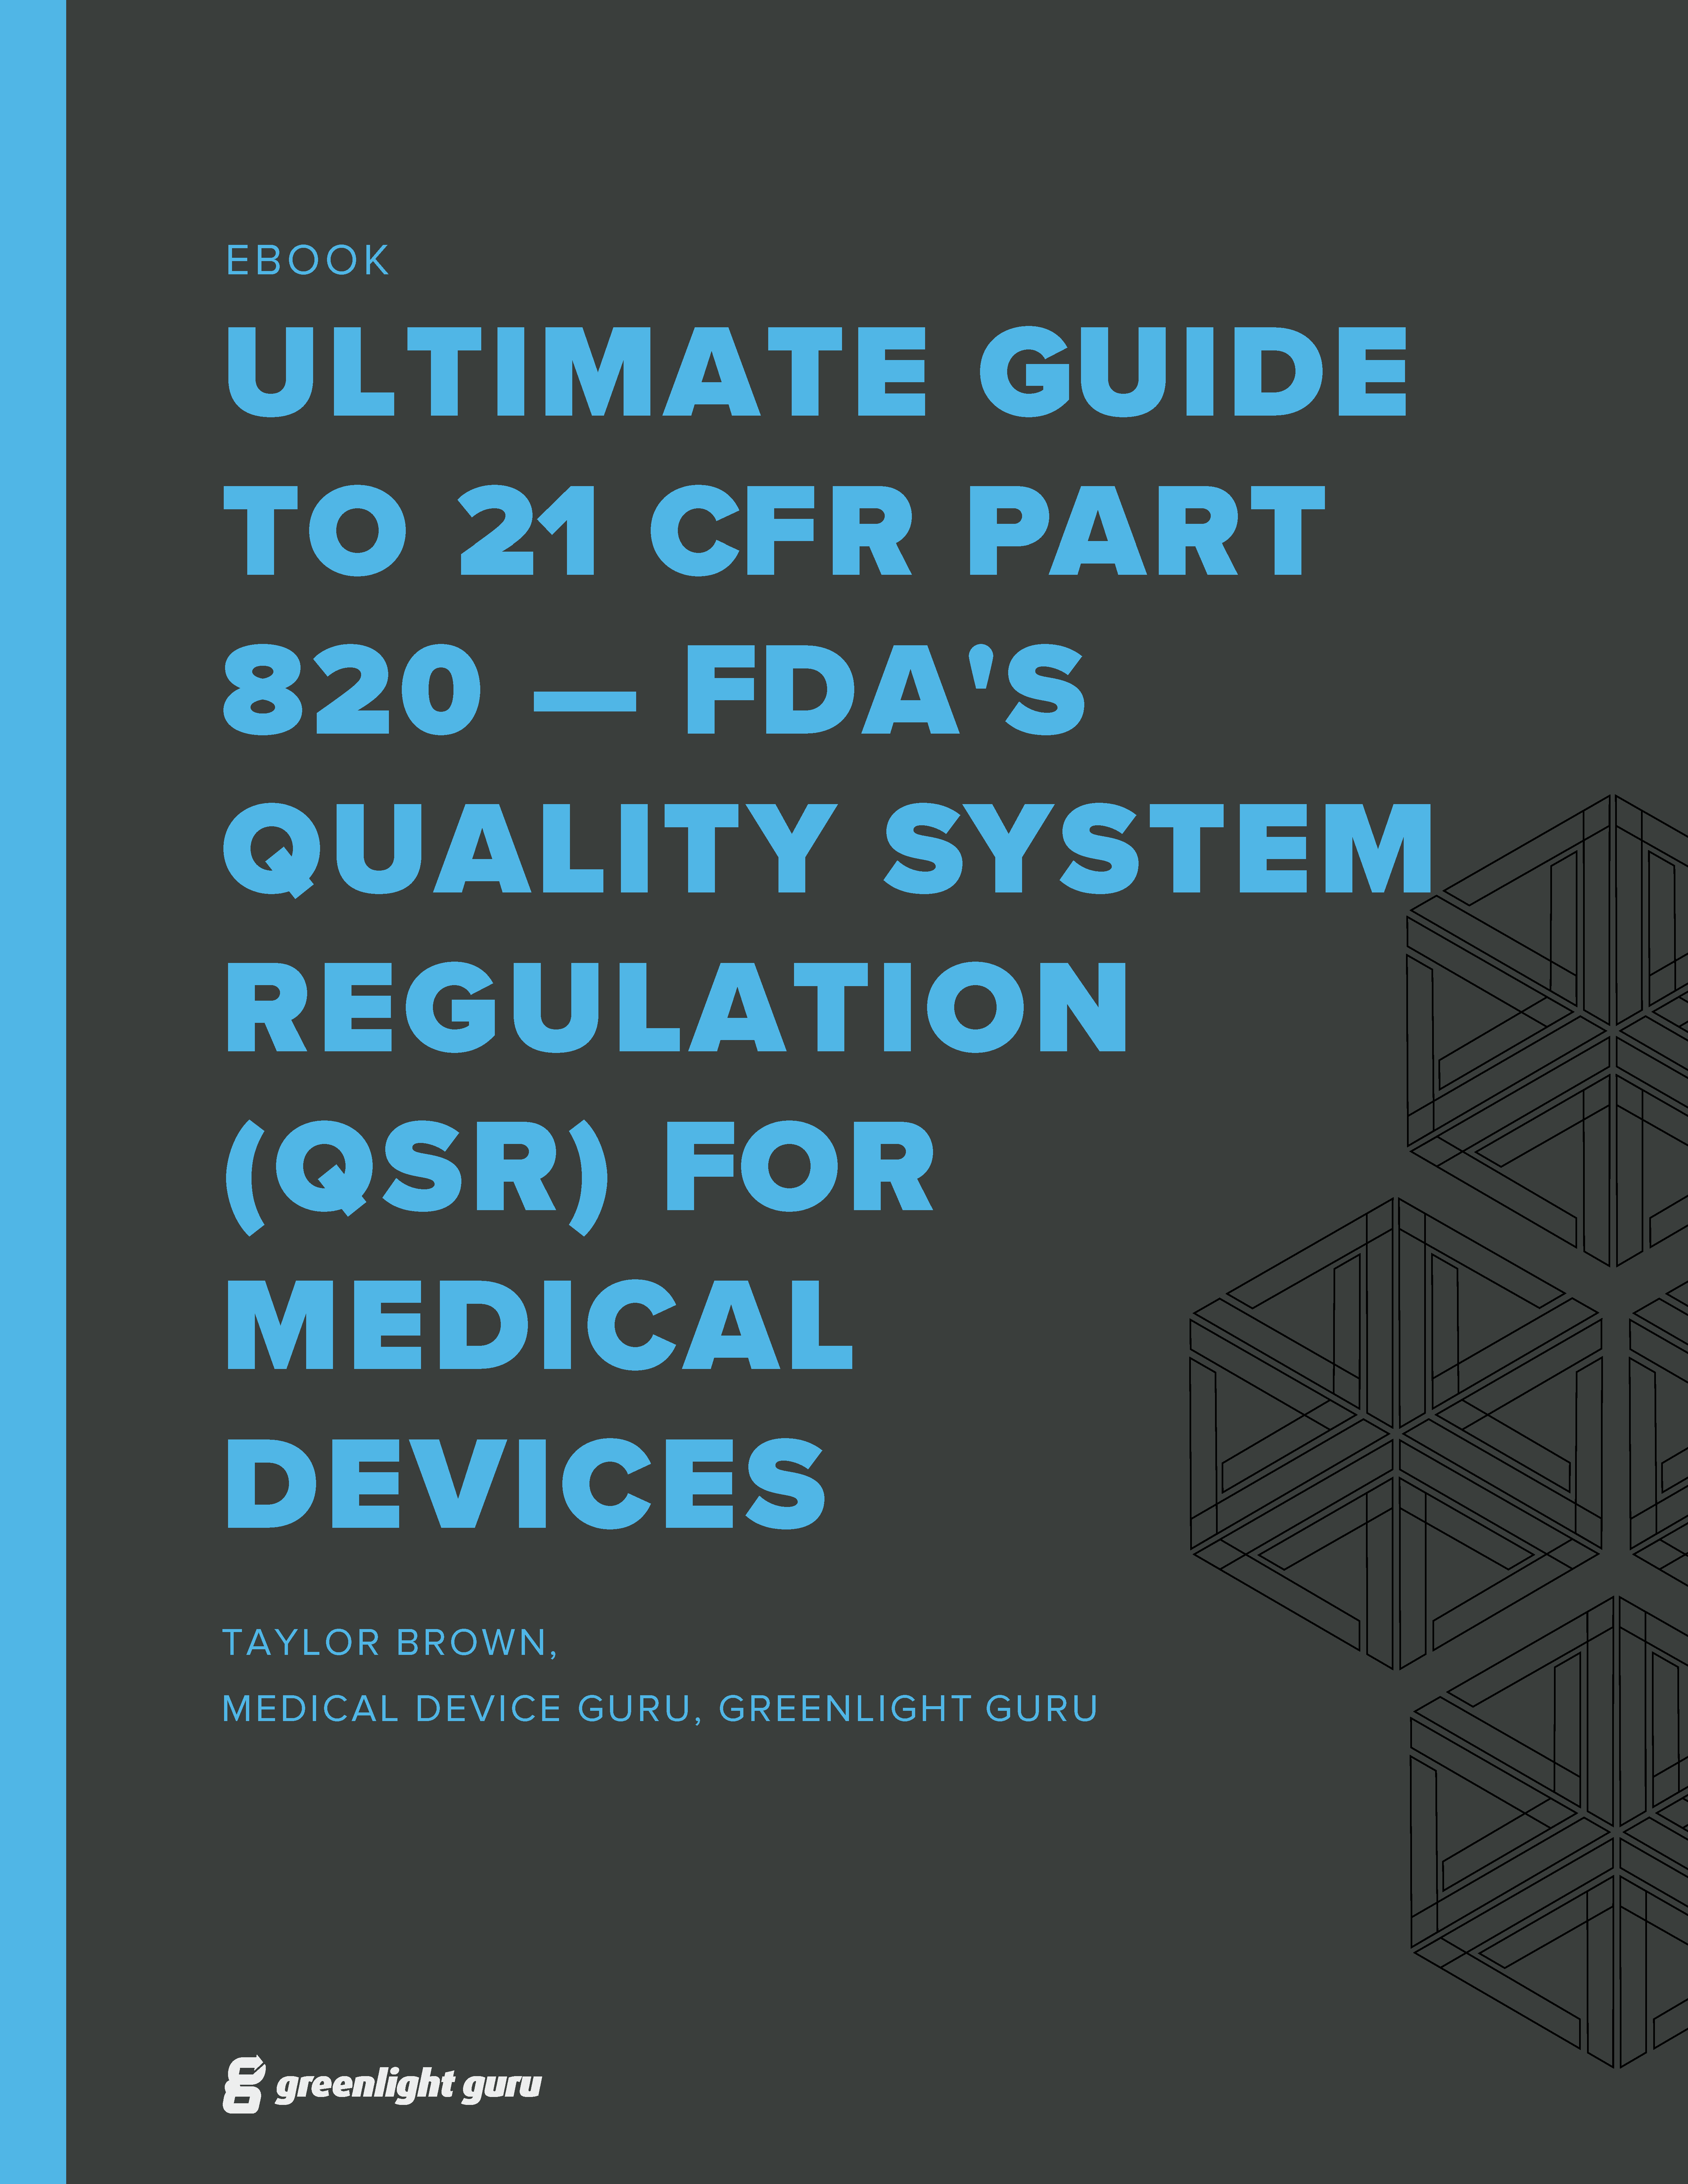 (cover) Ultimate Guide to 21 CFR Part 820 — FDA Quality System Regulation (QSR) for Medical Devices